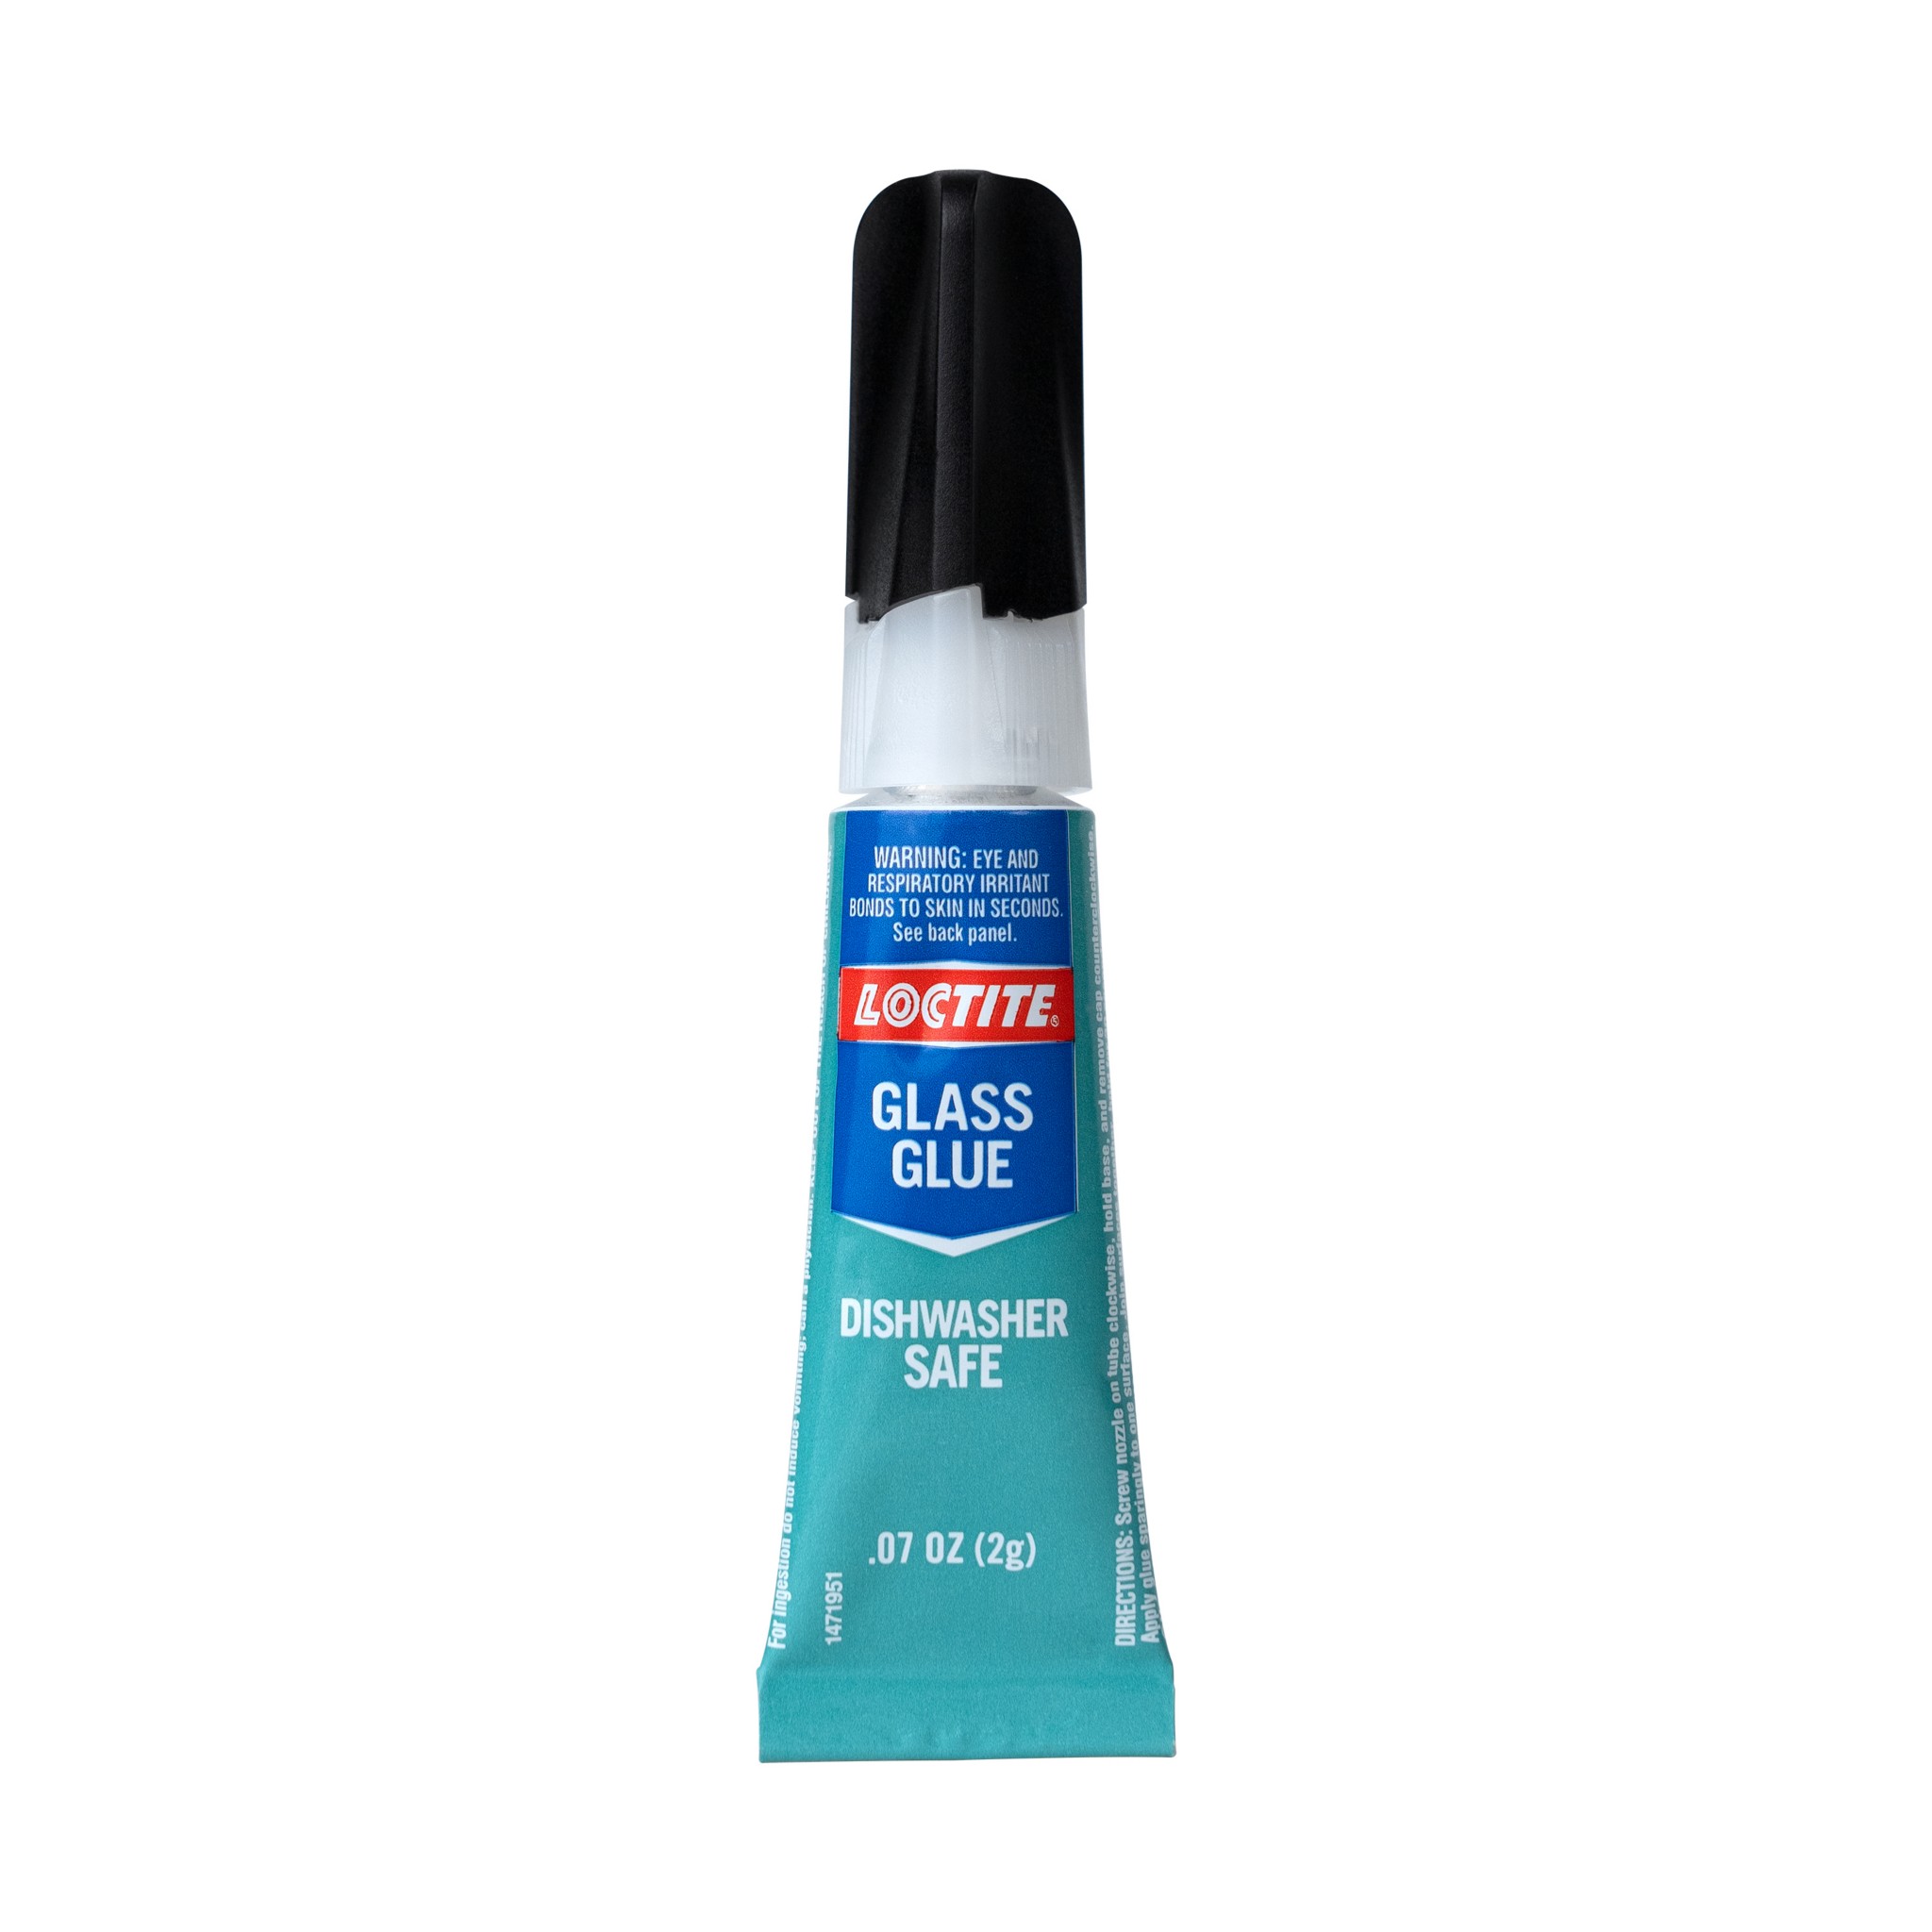 Glass Glue, Adhesive for Acrylic, for bonding Between Glass and Glass,  Acrylic, Metal, etc. Instant Super Glue for Glass, Glasses, Acrylic,  Crystal